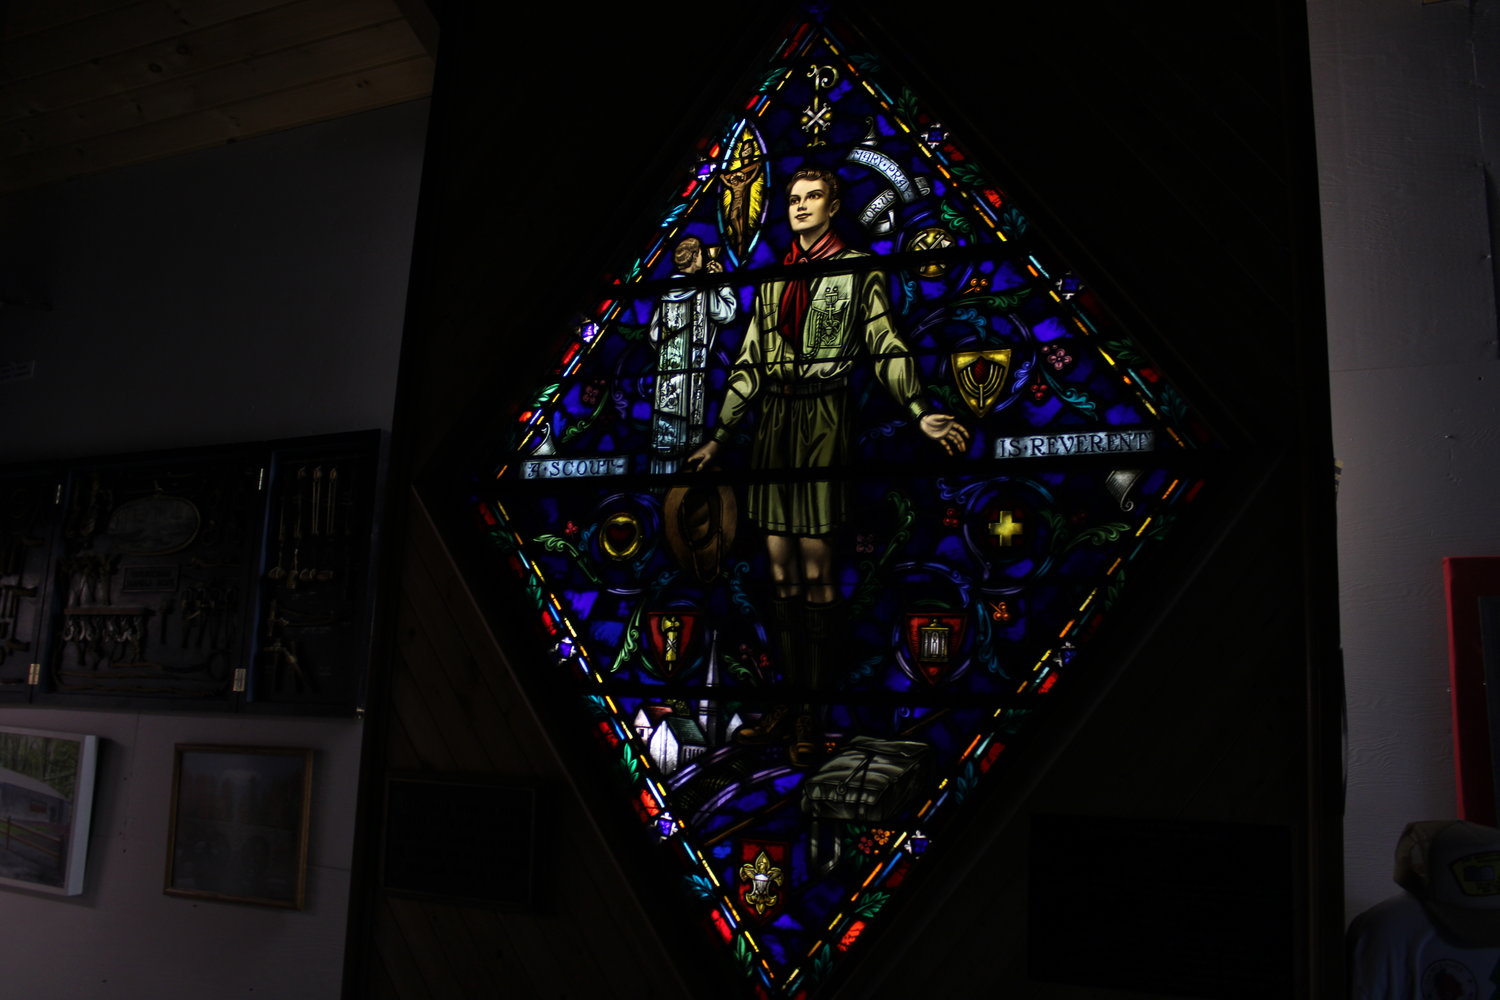 A stained glass window from the immaculate Heart of Mary Church, moved to the museum by volunteers in 2004.